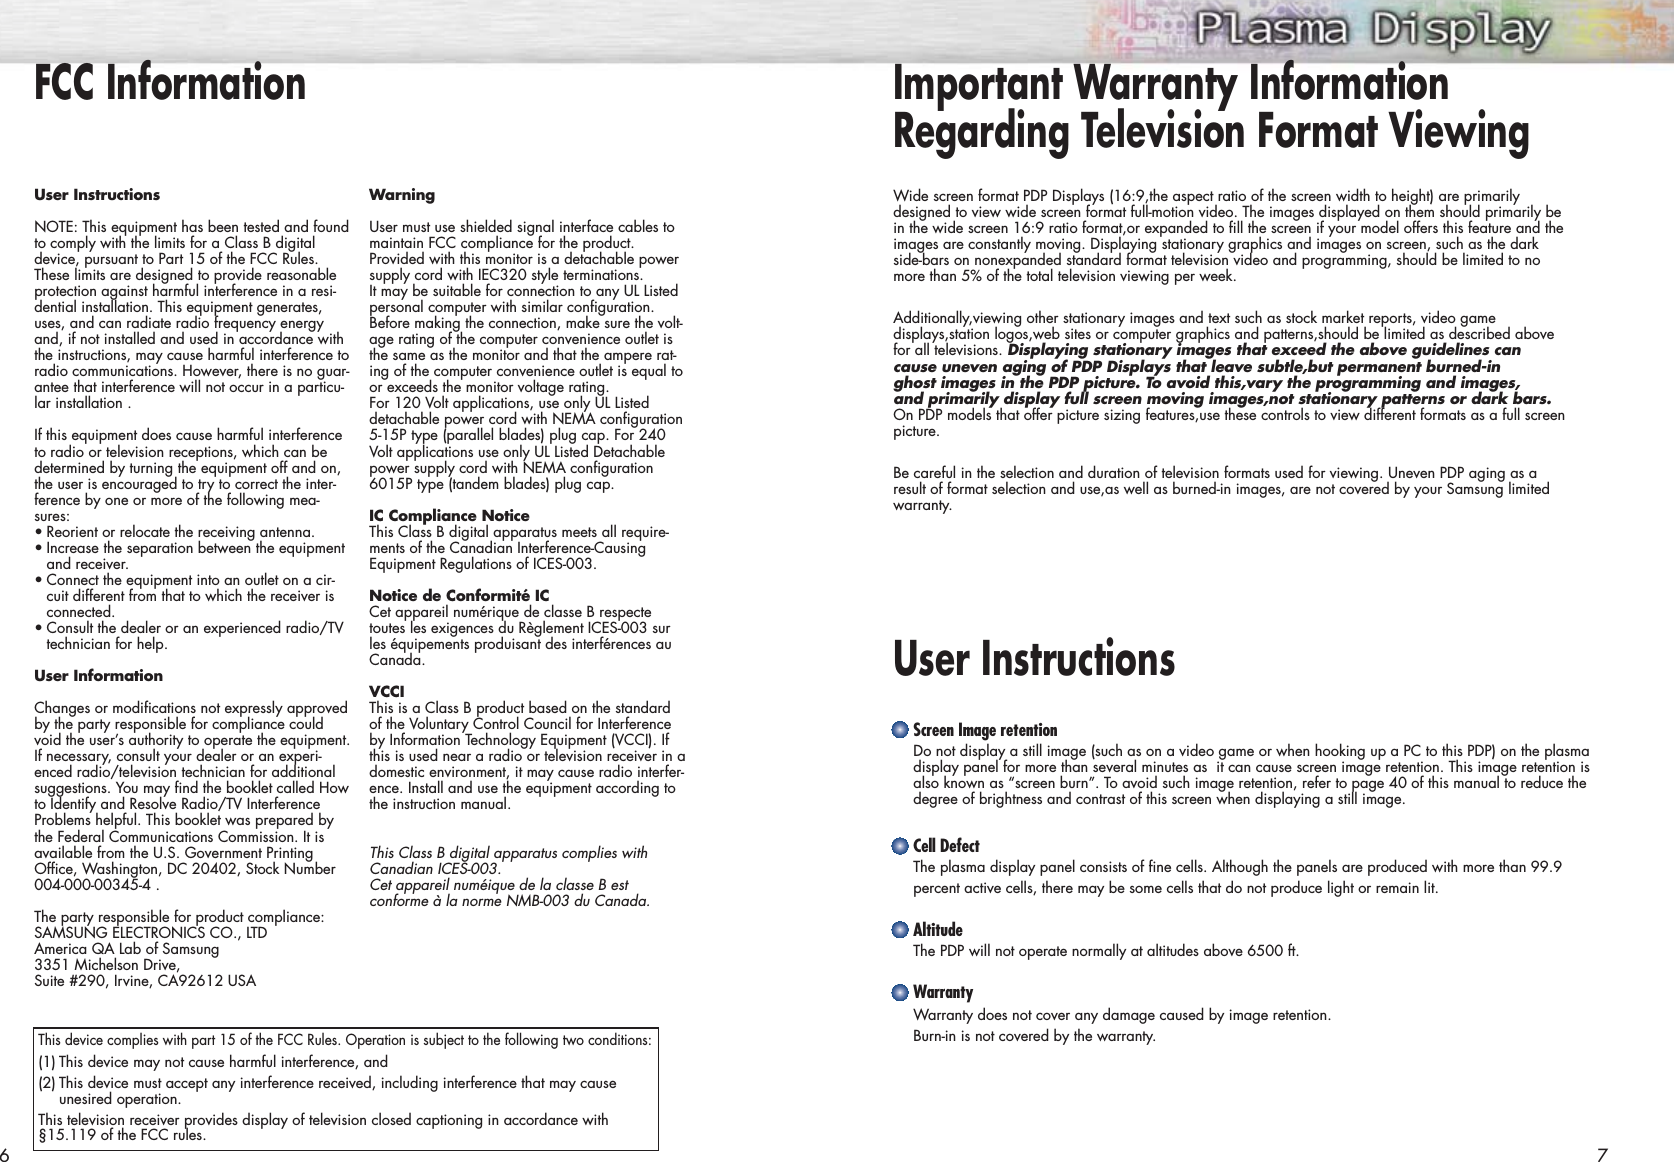 Important Warranty InformationRegarding Television Format ViewingUser Instructions Wide screen format PDP Displays (16:9,the aspect ratio of the screen width to height) are primarilydesigned to view wide screen format full-motion video. The images displayed on them should primarily bein the wide screen 16:9 ratio format,or expanded to fill the screen if your model offers this feature and theimages are constantly moving. Displaying stationary graphics and images on screen, such as the darkside-bars on nonexpanded standard format television video and programming, should be limited to nomore than 5% of the total television viewing per week.Additionally,viewing other stationary images and text such as stock market reports, video gamedisplays,station logos,web sites or computer graphics and patterns,should be limited as described abovefor all televisions. Displaying stationary images that exceed the above guidelines cancause uneven aging of PDP Displays that leave subtle,but permanent burned-in ghost images in the PDP picture. To avoid this,vary the programming and images, and primarily display full screen moving images,not stationary patterns or dark bars.On PDP models that offer picture sizing features,use these controls to view different formats as a full screenpicture.Be careful in the selection and duration of television formats used for viewing. Uneven PDP aging as aresult of format selection and use,as well as burned-in images, are not covered by your Samsung limitedwarranty.6 7Screen Image retentionDo not display a still image (such as on a video game or when hooking up a PC to this PDP) on the plasmadisplay panel for more than several minutes as  it can cause screen image retention. This image retention isalso known as “screen burn”. To avoid such image retention, refer to page 40 of this manual to reduce thedegree of brightness and contrast of this screen when displaying a still image.Cell DefectThe plasma display panel consists of fine cells. Although the panels are produced with more than 99.9 percent active cells, there may be some cells that do not produce light or remain lit.AltitudeThe PDP will not operate normally at altitudes above 6500 ft.WarrantyWarranty does not cover any damage caused by image retention.Burn-in is not covered by the warranty.User InstructionsNOTE: This equipment has been tested and foundto comply with the limits for a Class B digitaldevice, pursuant to Part 15 of the FCC Rules.These limits are designed to provide reasonableprotection against harmful interference in a resi-dential installation. This equipment generates,uses, and can radiate radio frequency energyand, if not installed and used in accordance withthe instructions, may cause harmful interference toradio communications. However, there is no guar-antee that interference will not occur in a particu-lar installation .If this equipment does cause harmful interferenceto radio or television receptions, which can bedetermined by turning the equipment off and on,the user is encouraged to try to correct the inter-ference by one or more of the following mea-sures:•Reorient or relocate the receiving antenna.•Increase the separation between the equipmentand receiver.•Connect the equipment into an outlet on a cir-cuit different from that to which the receiver isconnected.•Consult the dealer or an experienced radio/TVtechnician for help.User InformationChanges or modifications not expressly approvedby the party responsible for compliance couldvoid the user’s authority to operate the equipment.If necessary, consult your dealer or an experi-enced radio/television technician for additionalsuggestions. You may find the booklet called Howto Identify and Resolve Radio/TV InterferenceProblems helpful. This booklet was prepared bythe Federal Communications Commission. It isavailable from the U.S. Government PrintingOffice, Washington, DC 20402, Stock Number004-000-00345-4 .The party responsible for product compliance:SAMSUNG ELECTRONICS CO., LTDAmerica QA Lab of Samsung3351 Michelson Drive,Suite #290, Irvine, CA92612 USAWarningUser must use shielded signal interface cables tomaintain FCC compliance for the product.Provided with this monitor is a detachable powersupply cord with IEC320 style terminations. It may be suitable for connection to any UL Listedpersonal computer with similar configuration.Before making the connection, make sure the volt-age rating of the computer convenience outlet isthe same as the monitor and that the ampere rat-ing of the computer convenience outlet is equal toor exceeds the monitor voltage rating.For 120 Volt applications, use only UL Listeddetachable power cord with NEMA configuration5-15P type (parallel blades) plug cap. For 240Volt applications use only UL Listed Detachablepower supply cord with NEMA configuration6015P type (tandem blades) plug cap.IC Compliance NoticeThis Class B digital apparatus meets all require-ments of the Canadian Interference-CausingEquipment Regulations of ICES-003.Notice de Conformité ICCet appareil numérique de classe B respectetoutes les exigences du Règlement ICES-003 surles équipements produisant des interférences auCanada.VCCIThis is a Class B product based on the standardof the Voluntary Control Council for Interferenceby Information Technology Equipment (VCCI). Ifthis is used near a radio or television receiver in adomestic environment, it may cause radio interfer-ence. Install and use the equipment according tothe instruction manual.This Class B digital apparatus complies withCanadian ICES-003. Cet appareil numéique de la classe B est conforme à la norme NMB-003 du Canada.FCC InformationThis device complies with part 15 of the FCC Rules. Operation is subject to the following two conditions:(1) This device may not cause harmful interference, and(2) This device must accept any interference received, including interference that may cause unesired operation.This television receiver provides display of television closed captioning in accordance with§15.119 of the FCC rules.